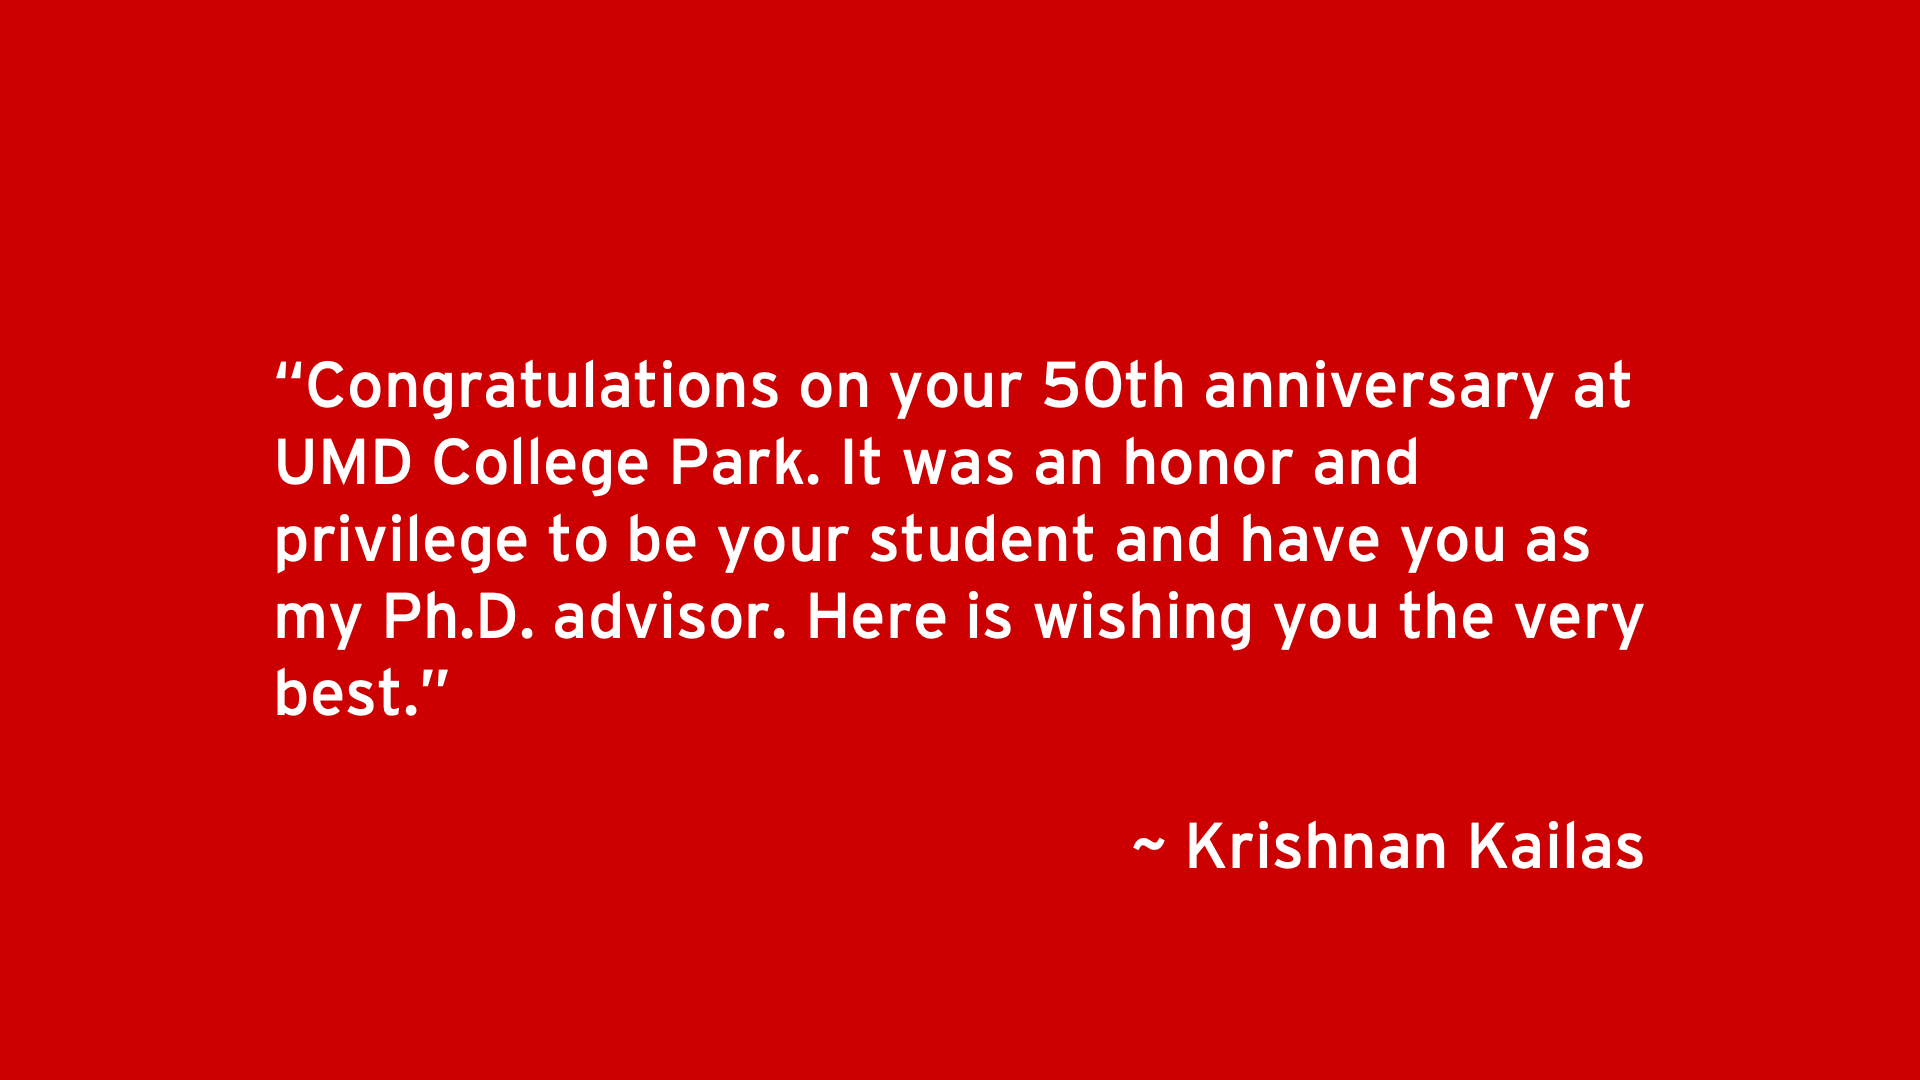 Congratulations on your 50th anniversary at UMD College Park. It was an honor and privilege to be your student and have you as my Ph.D. advisor. Here is wishing you the very best. - Krisnan Kailas